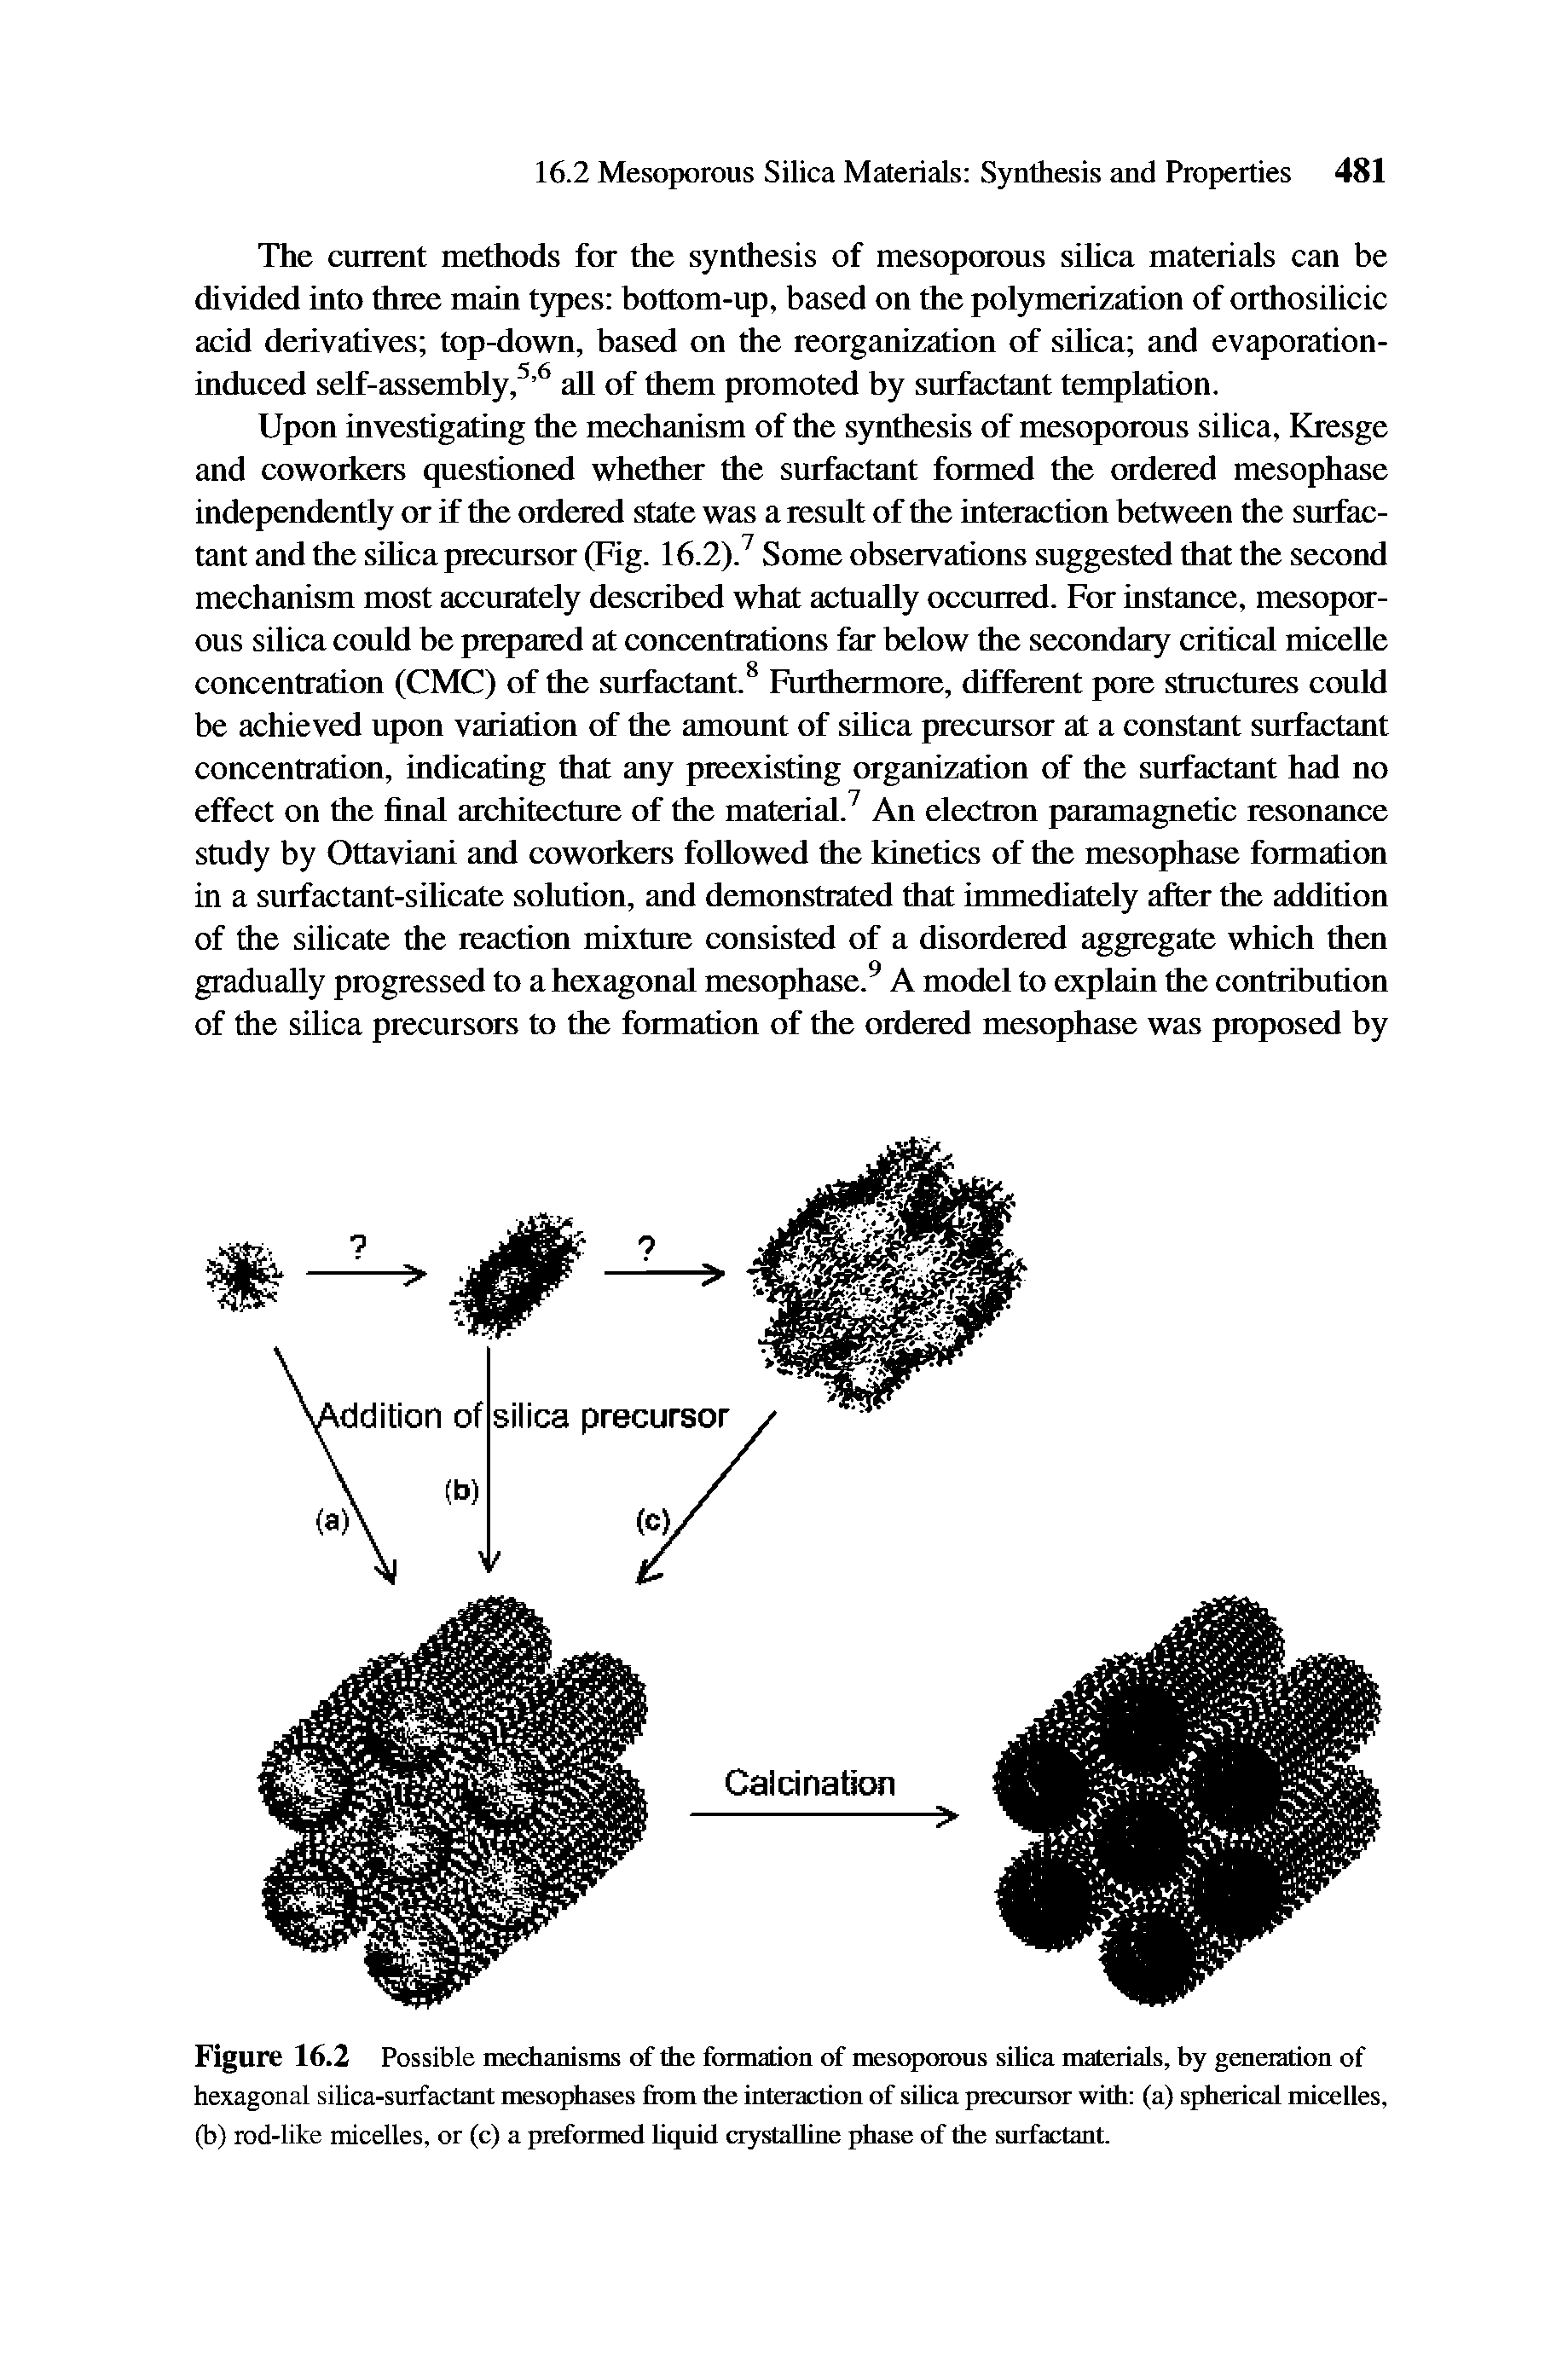 Figure 16.2 Possible mechanisms of the formation of mesoporous silica materials, by generation of hexagonal silica-surfactant mesophases horn the interaction of silica precursor with (a) spherical micelles, (b) rod-like micelles, or (c) a preformed liquid crystalline phase of the surfactant.